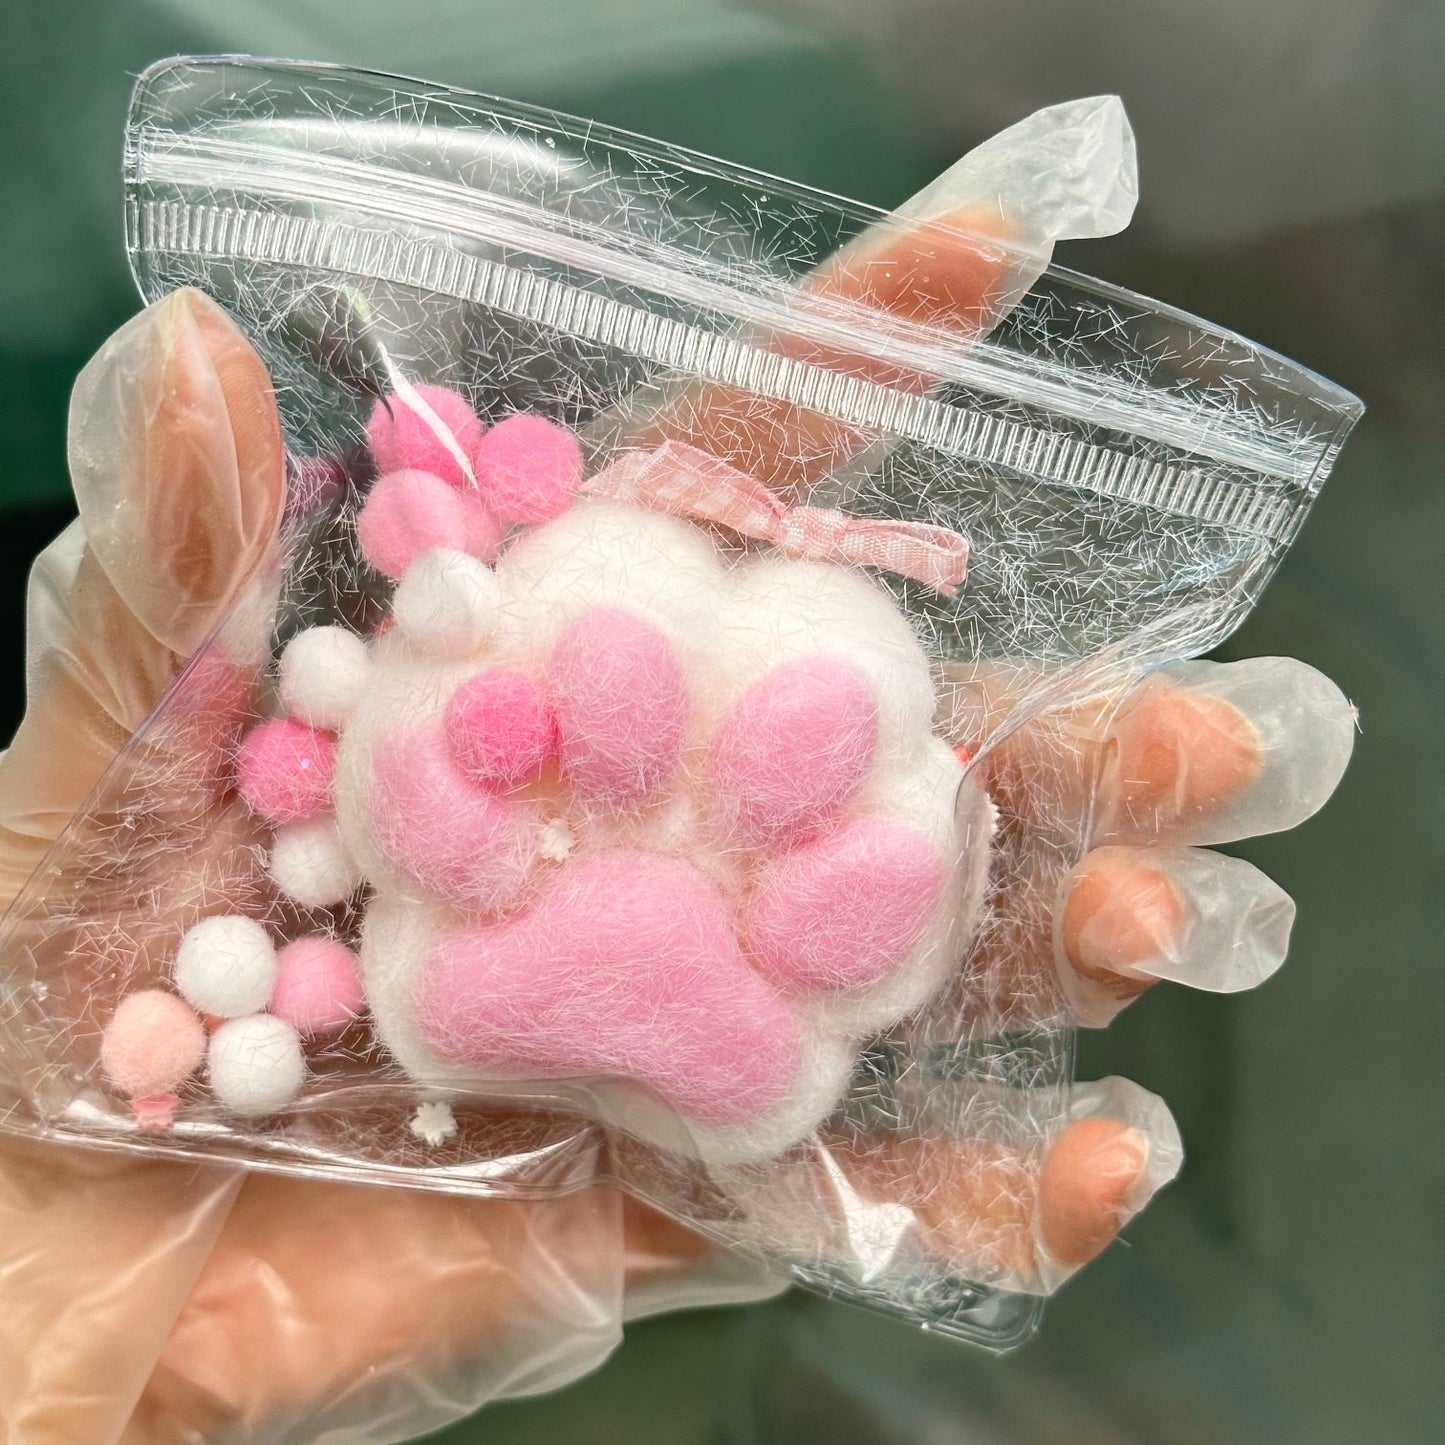 115g Handmade Silicone Cat's Paw with fur Stress Relief Squishy Toy